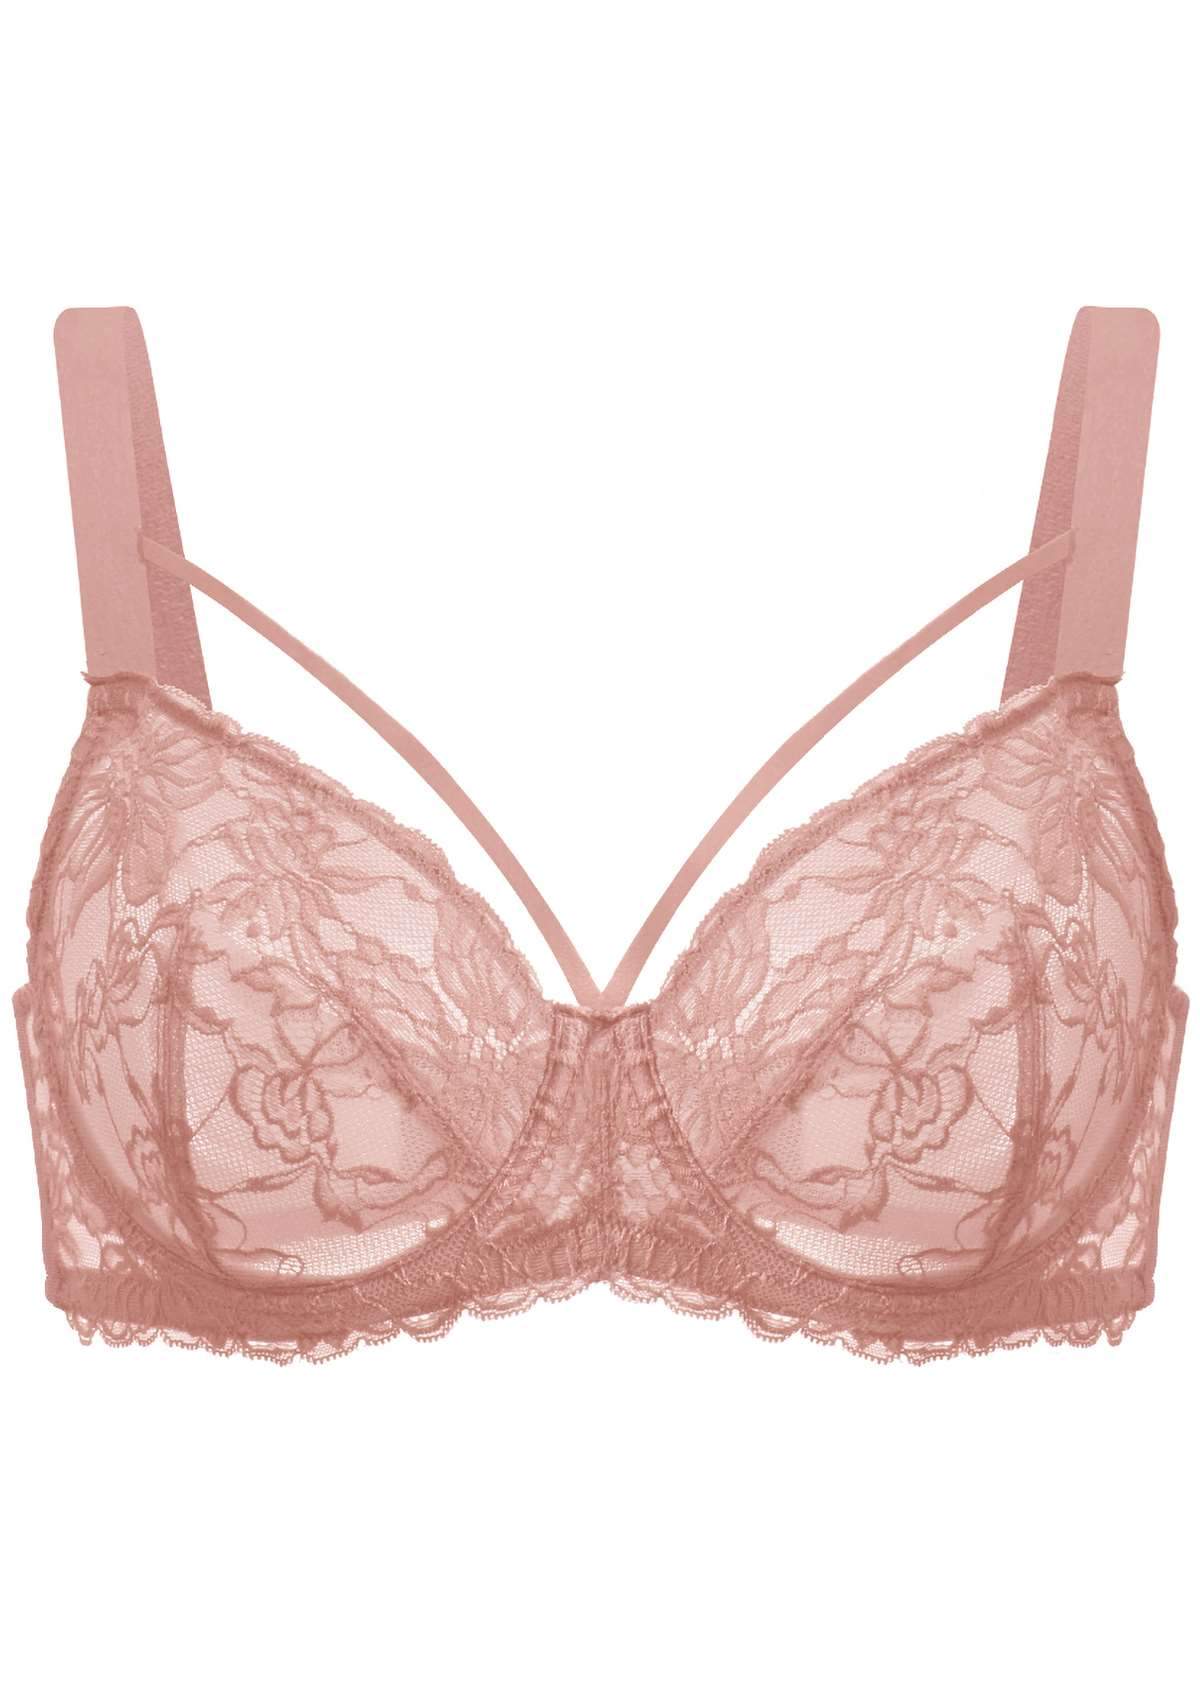 HSIA Pretty In Petals Lace Bra And Panty Sets: Bra For Big Boobs - Light Coral / 36 / D